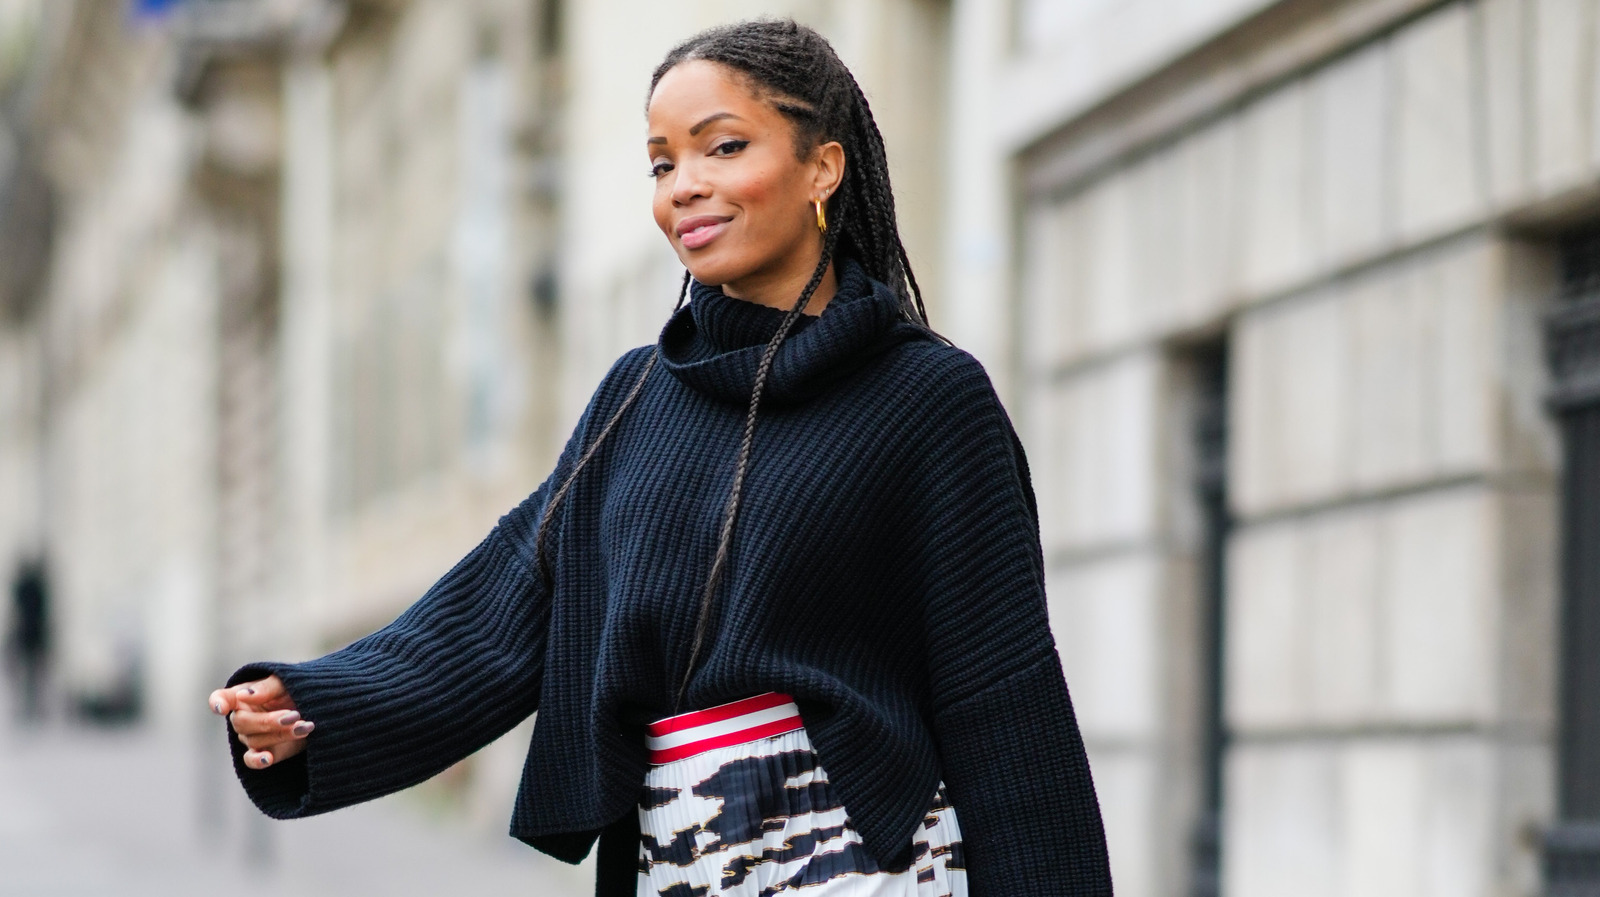 Add This Cowl Neck Sweater To Your Winter Wardrobe